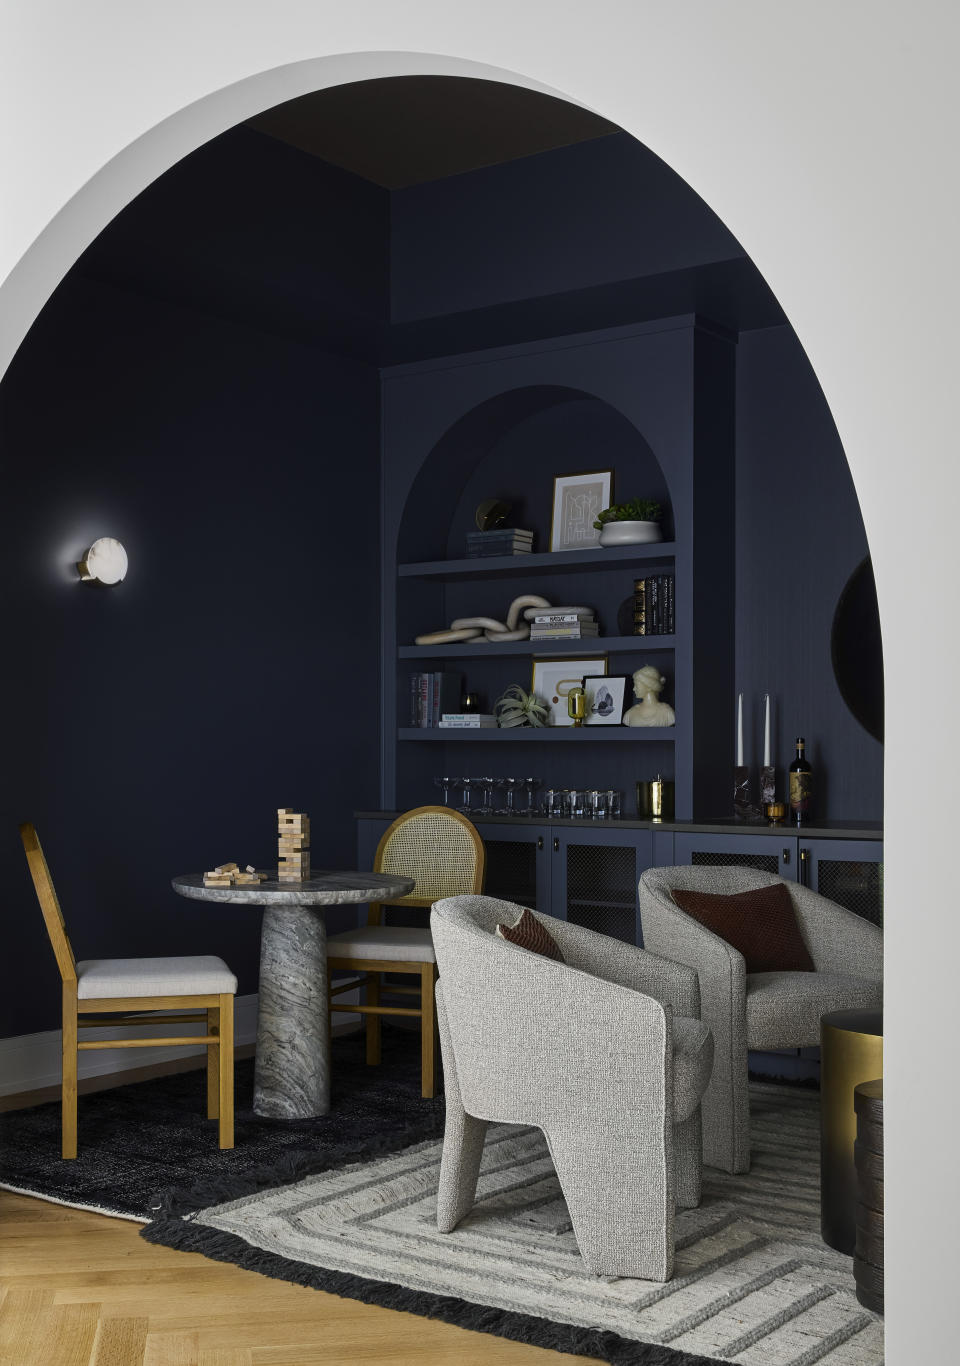 This image provided by DGI Designs shows a modern boho home located in New Buffalo Michigan, DGI created a cool cozy alcove; the inky blue hue accentuates the curved ceiling and intimate space. (DGI Designs via AP)